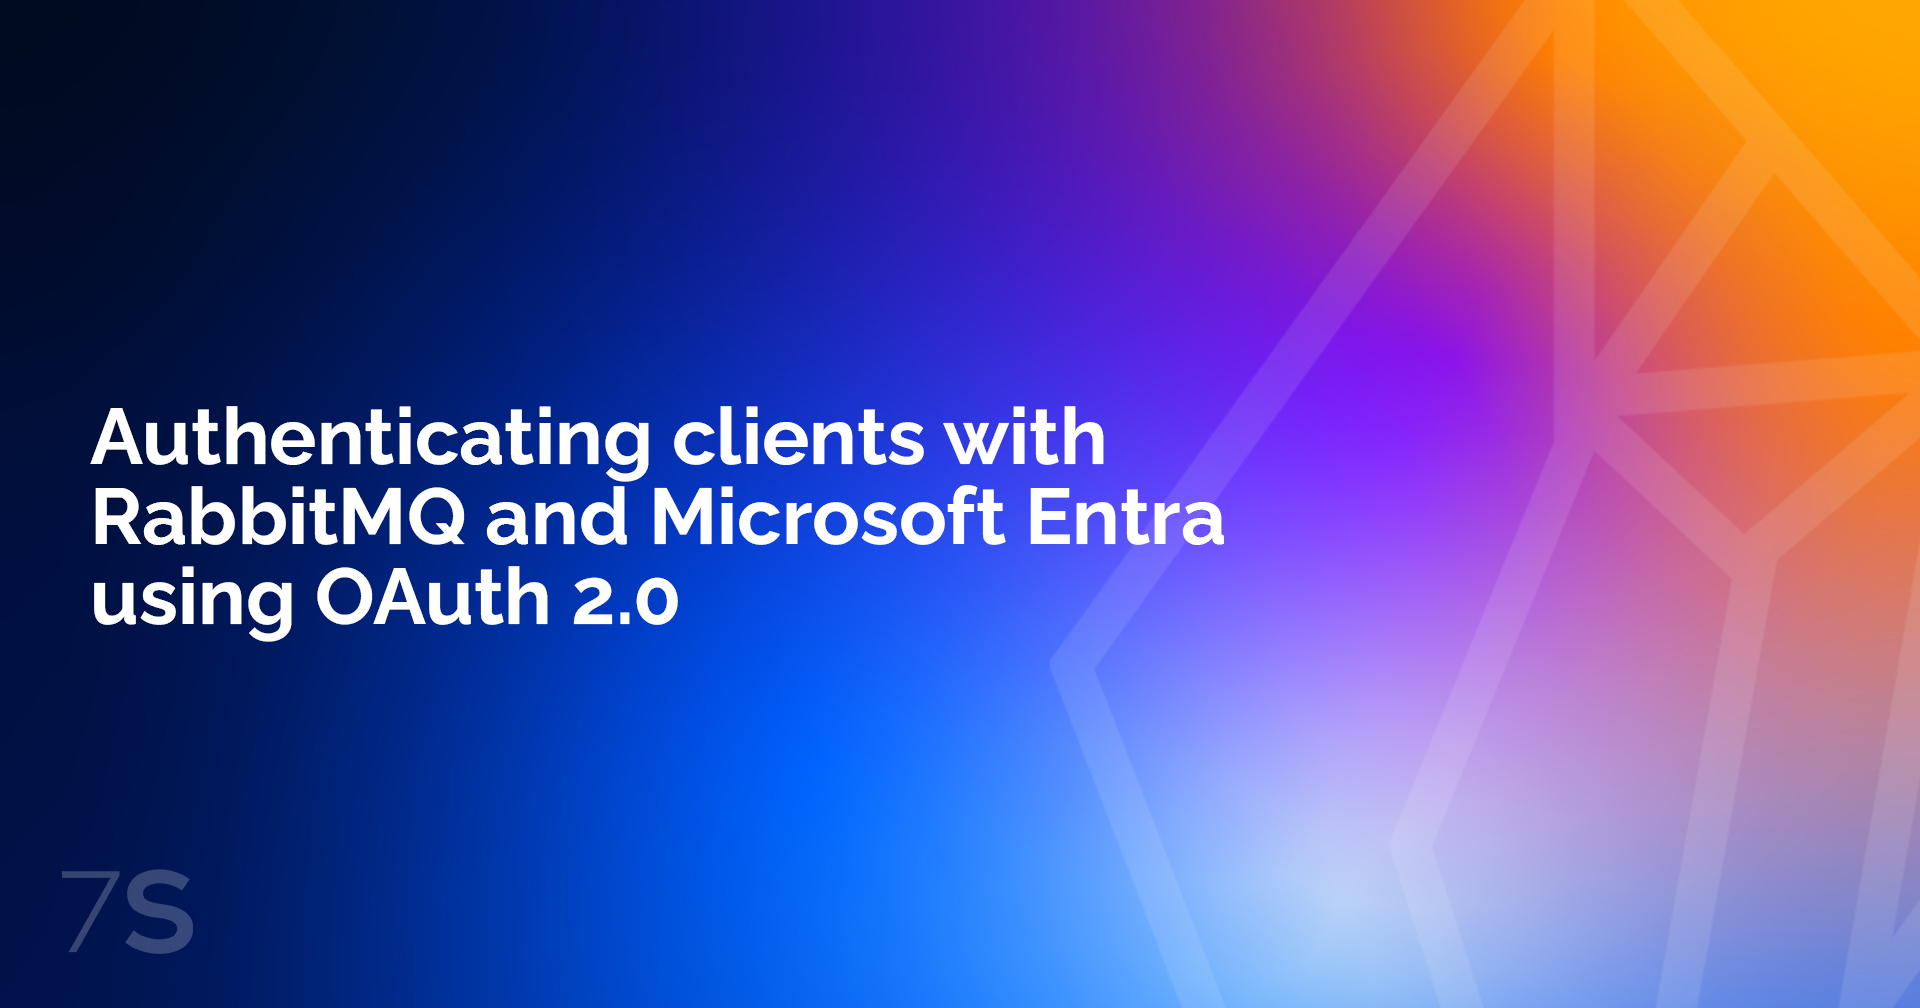 Authenticating clients with RabbitMQ and Microsoft Entra using OAuth 2.0